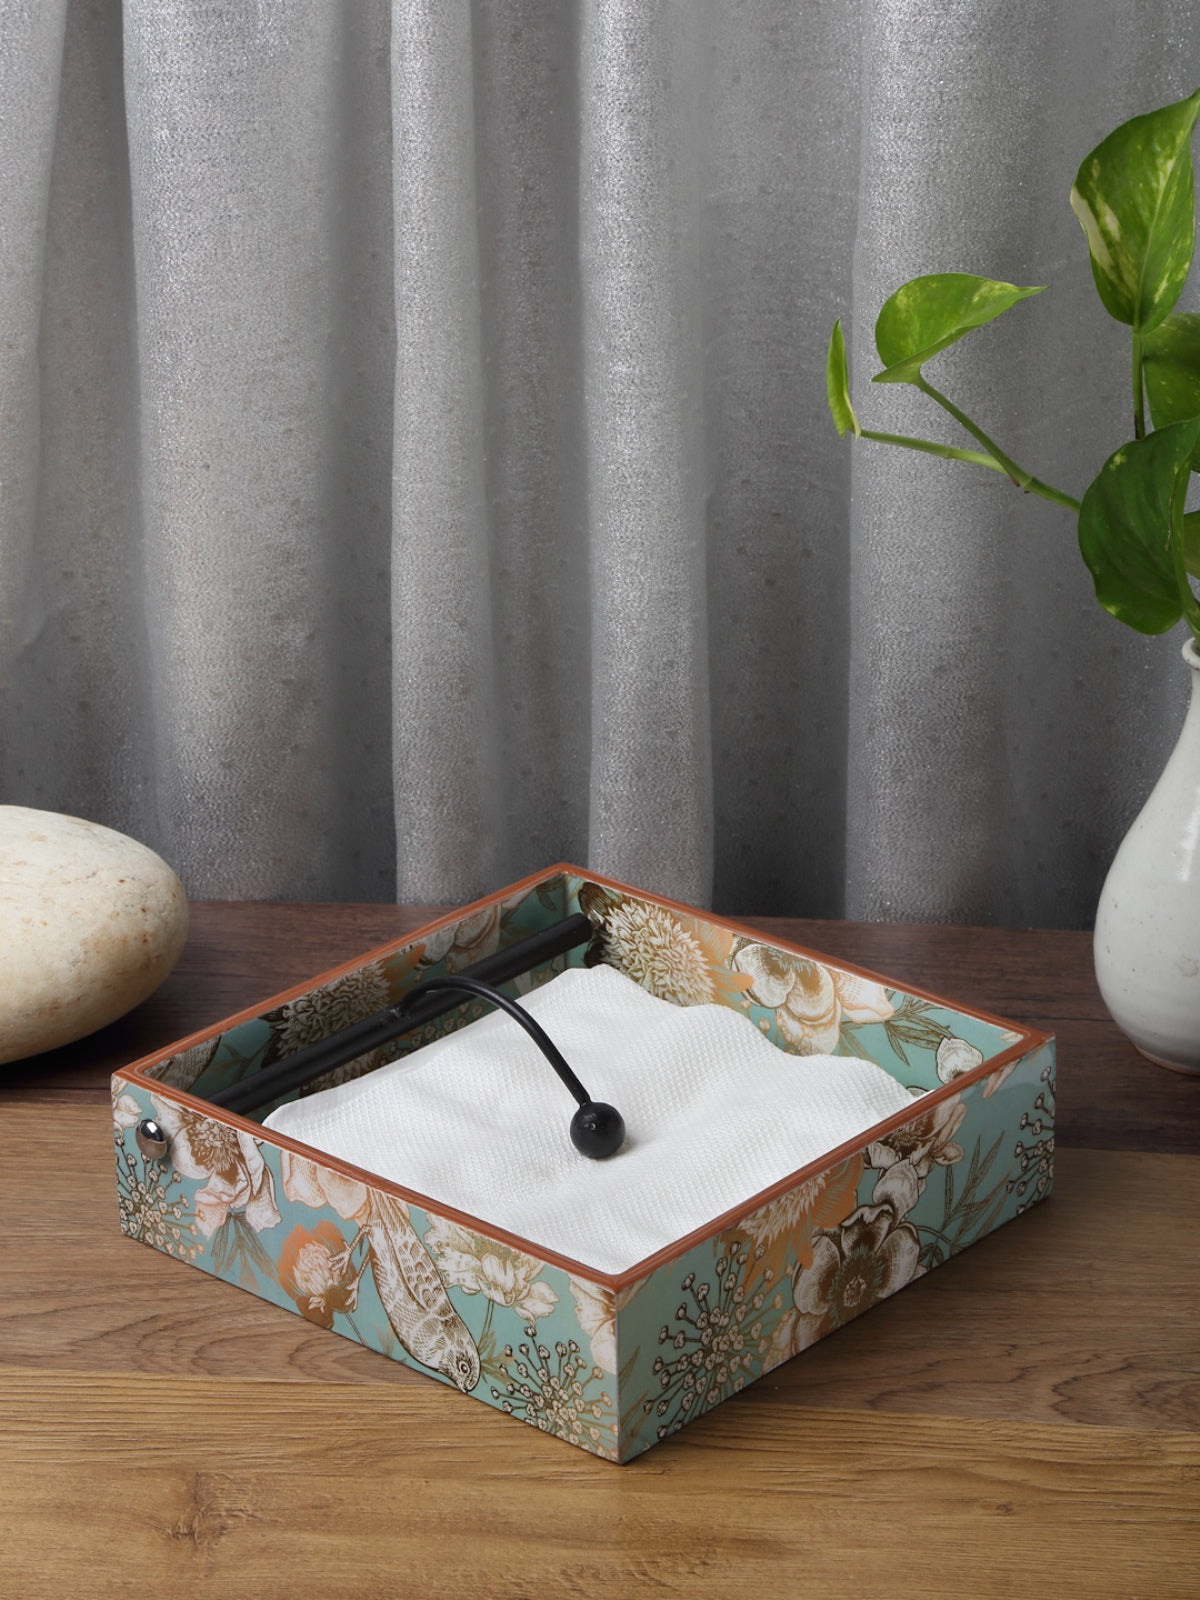 Green & Brown Floral Patterned Wooden Tissue Square Tray